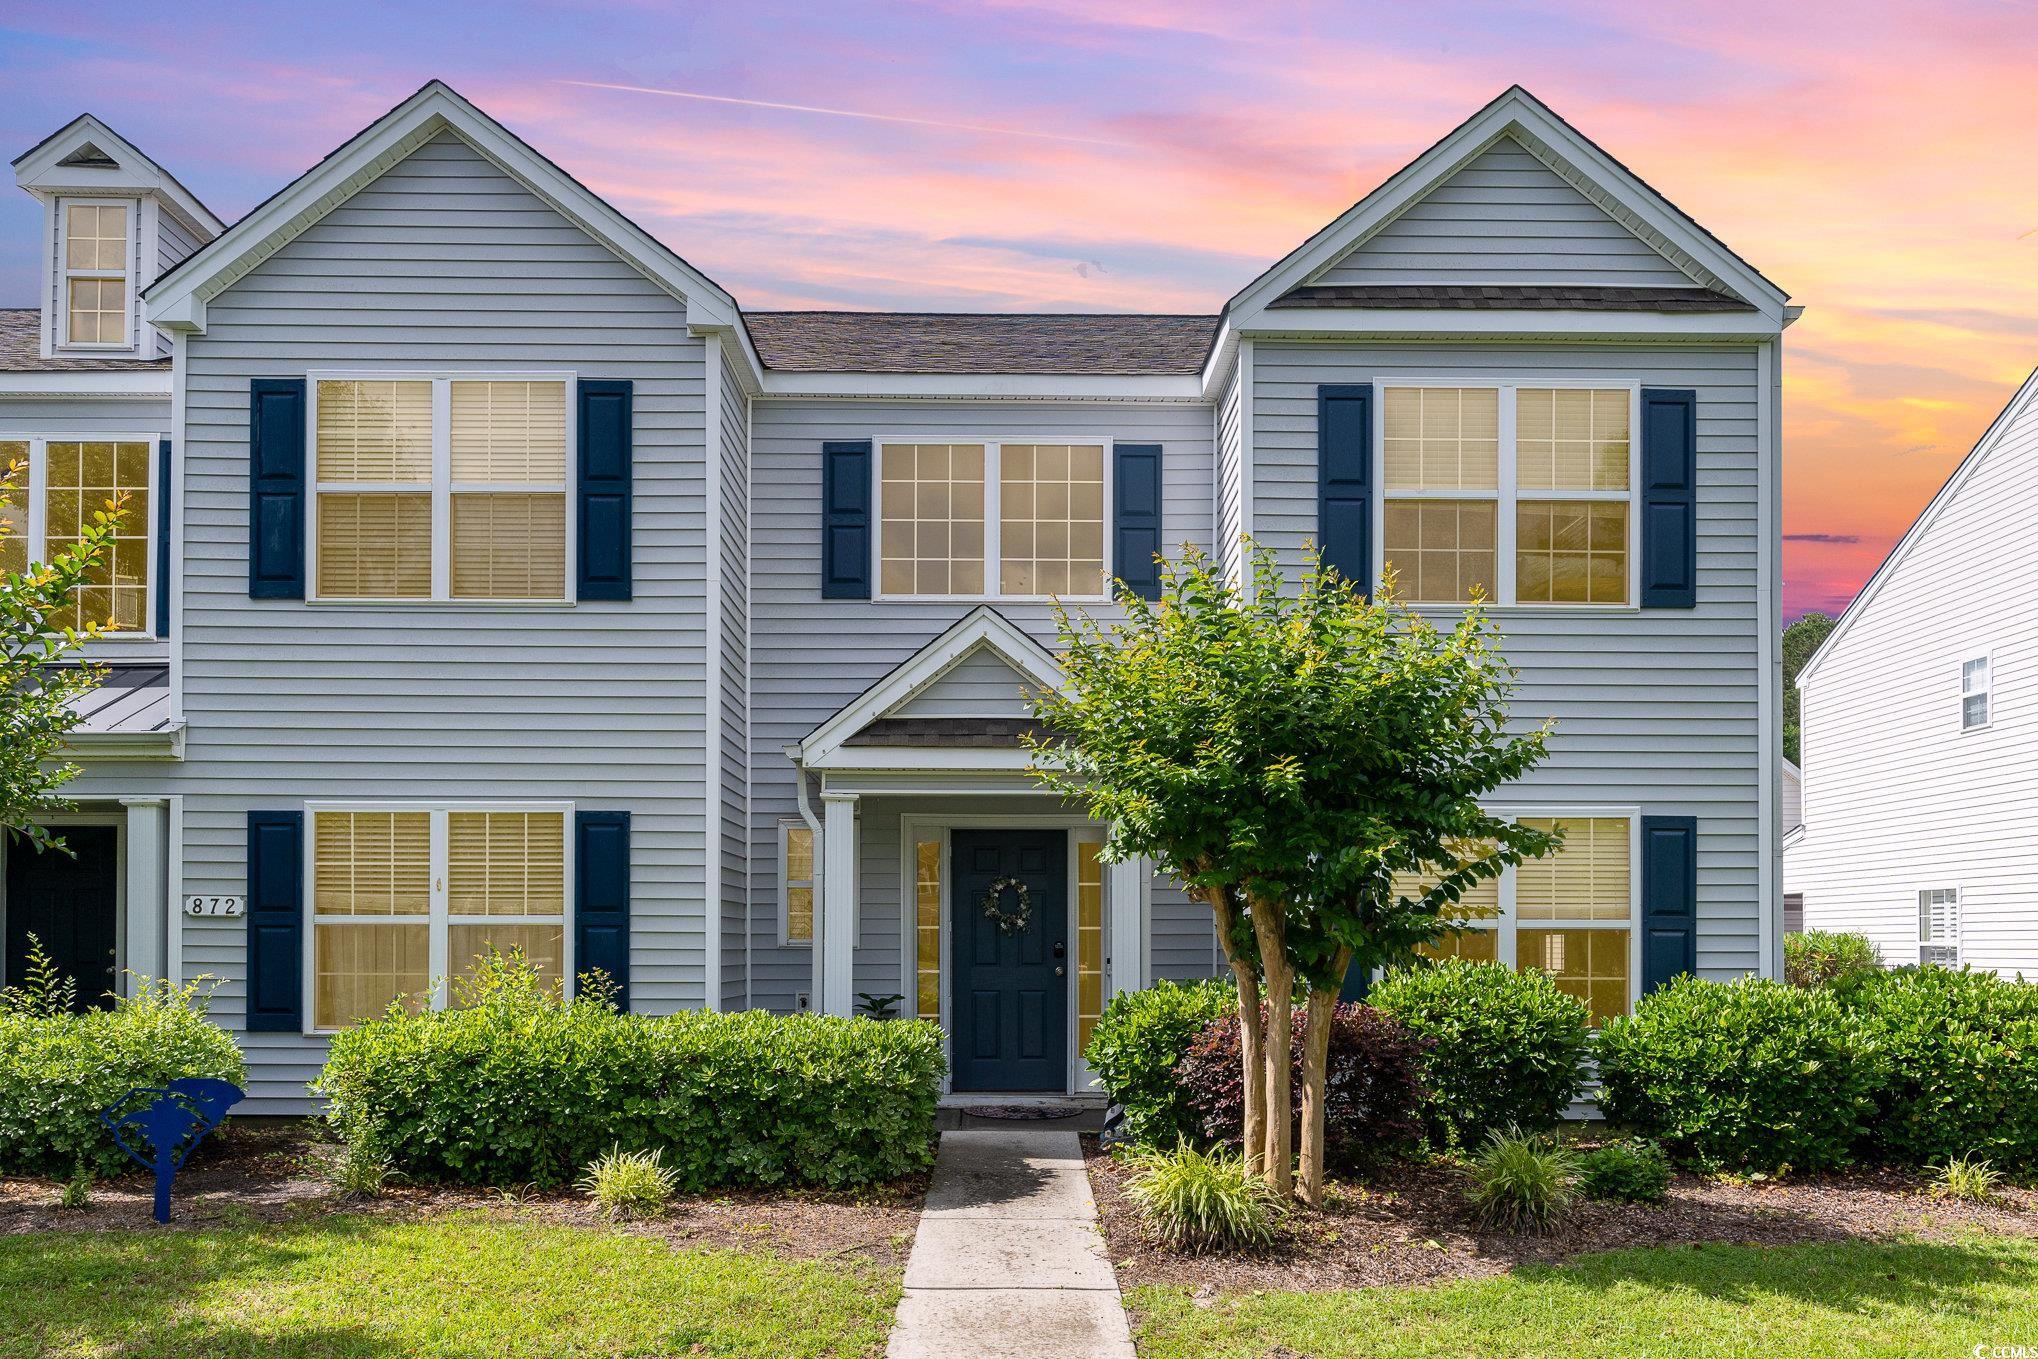 View Myrtle Beach, SC 29579 townhome